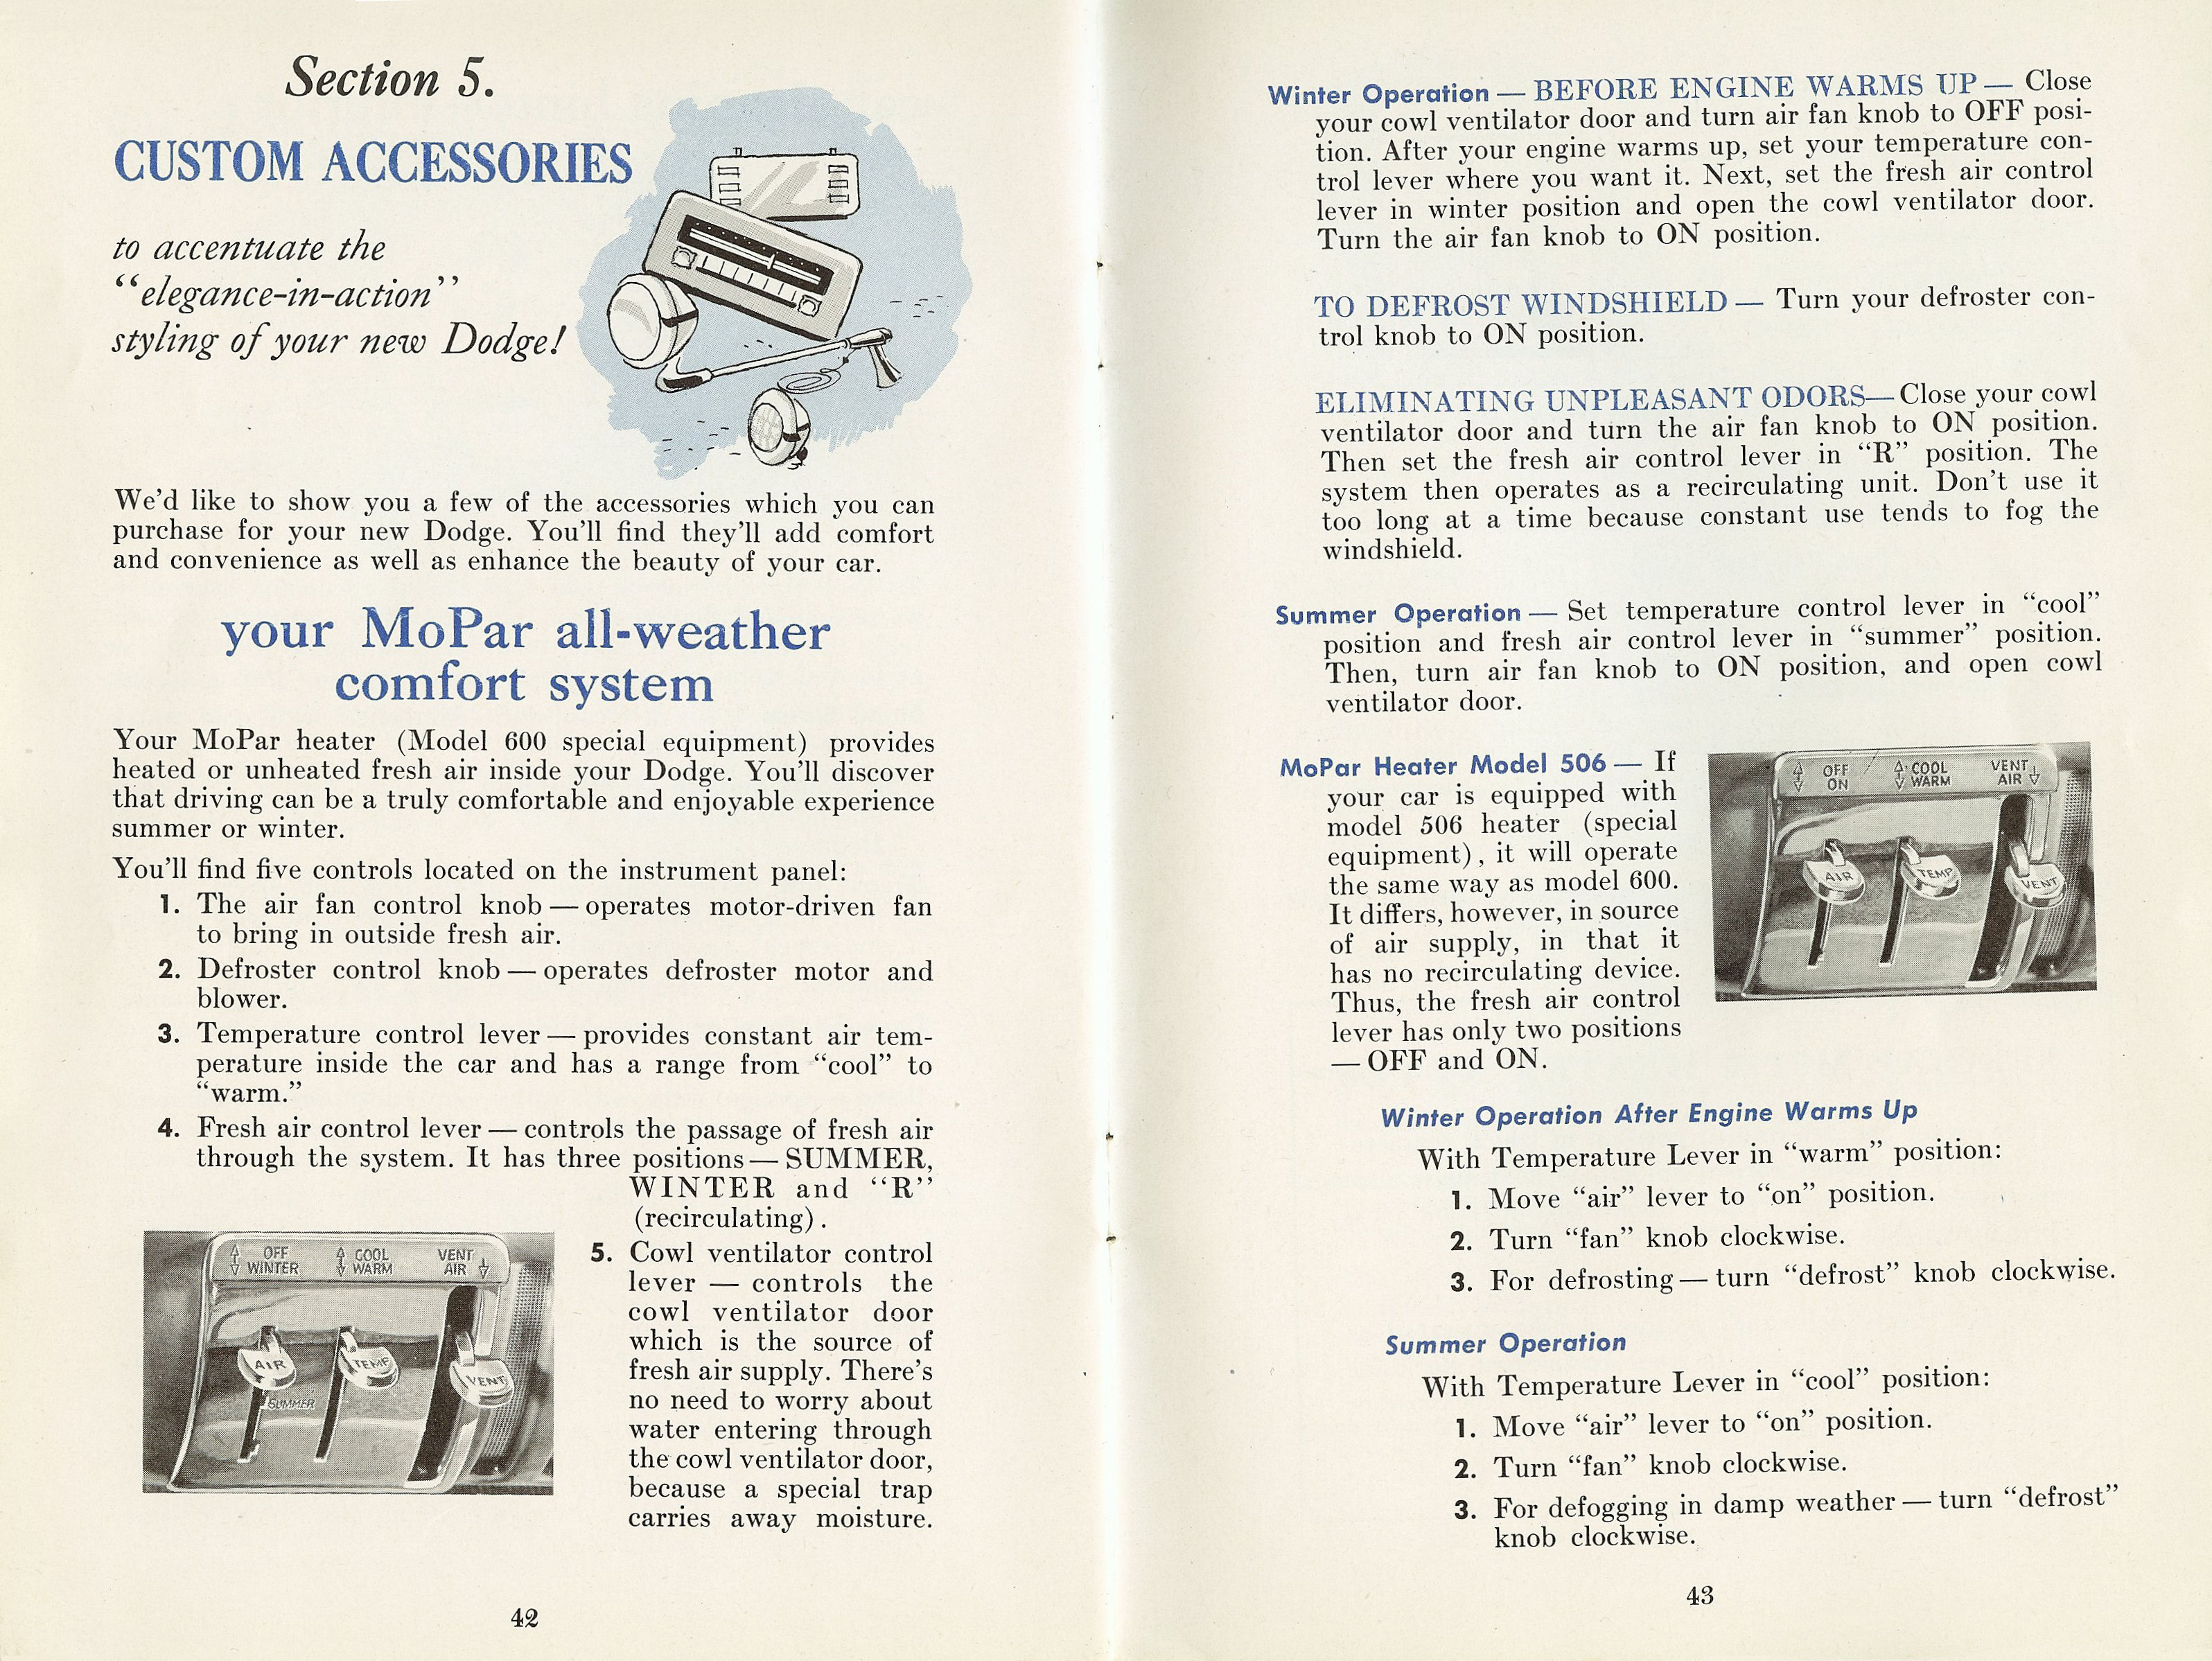 1954_Dodge_Owners_Manual-42-43